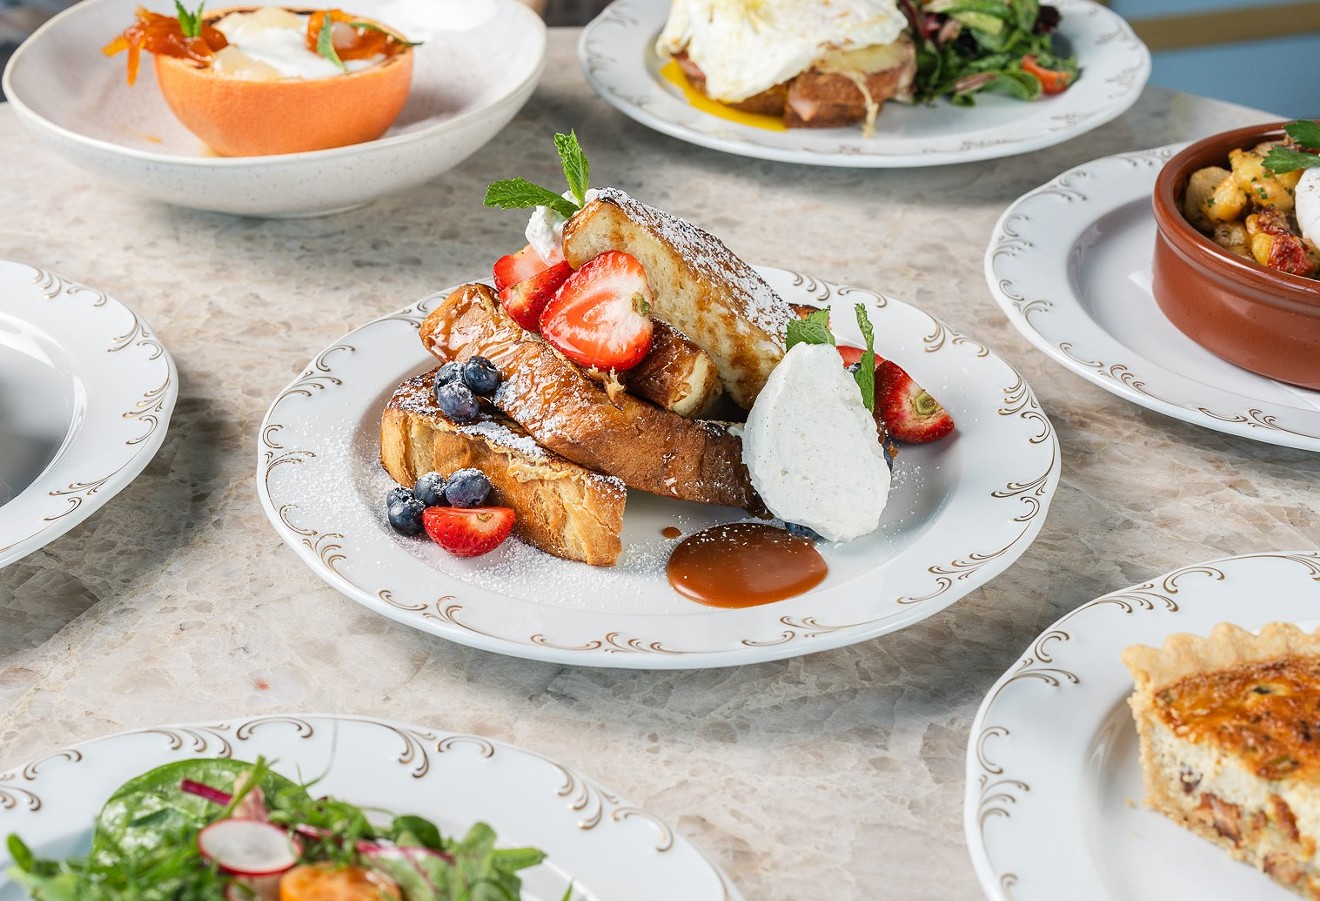 Pain Perdu is just one of the French classics on the menu at Annabelle Brasserie.